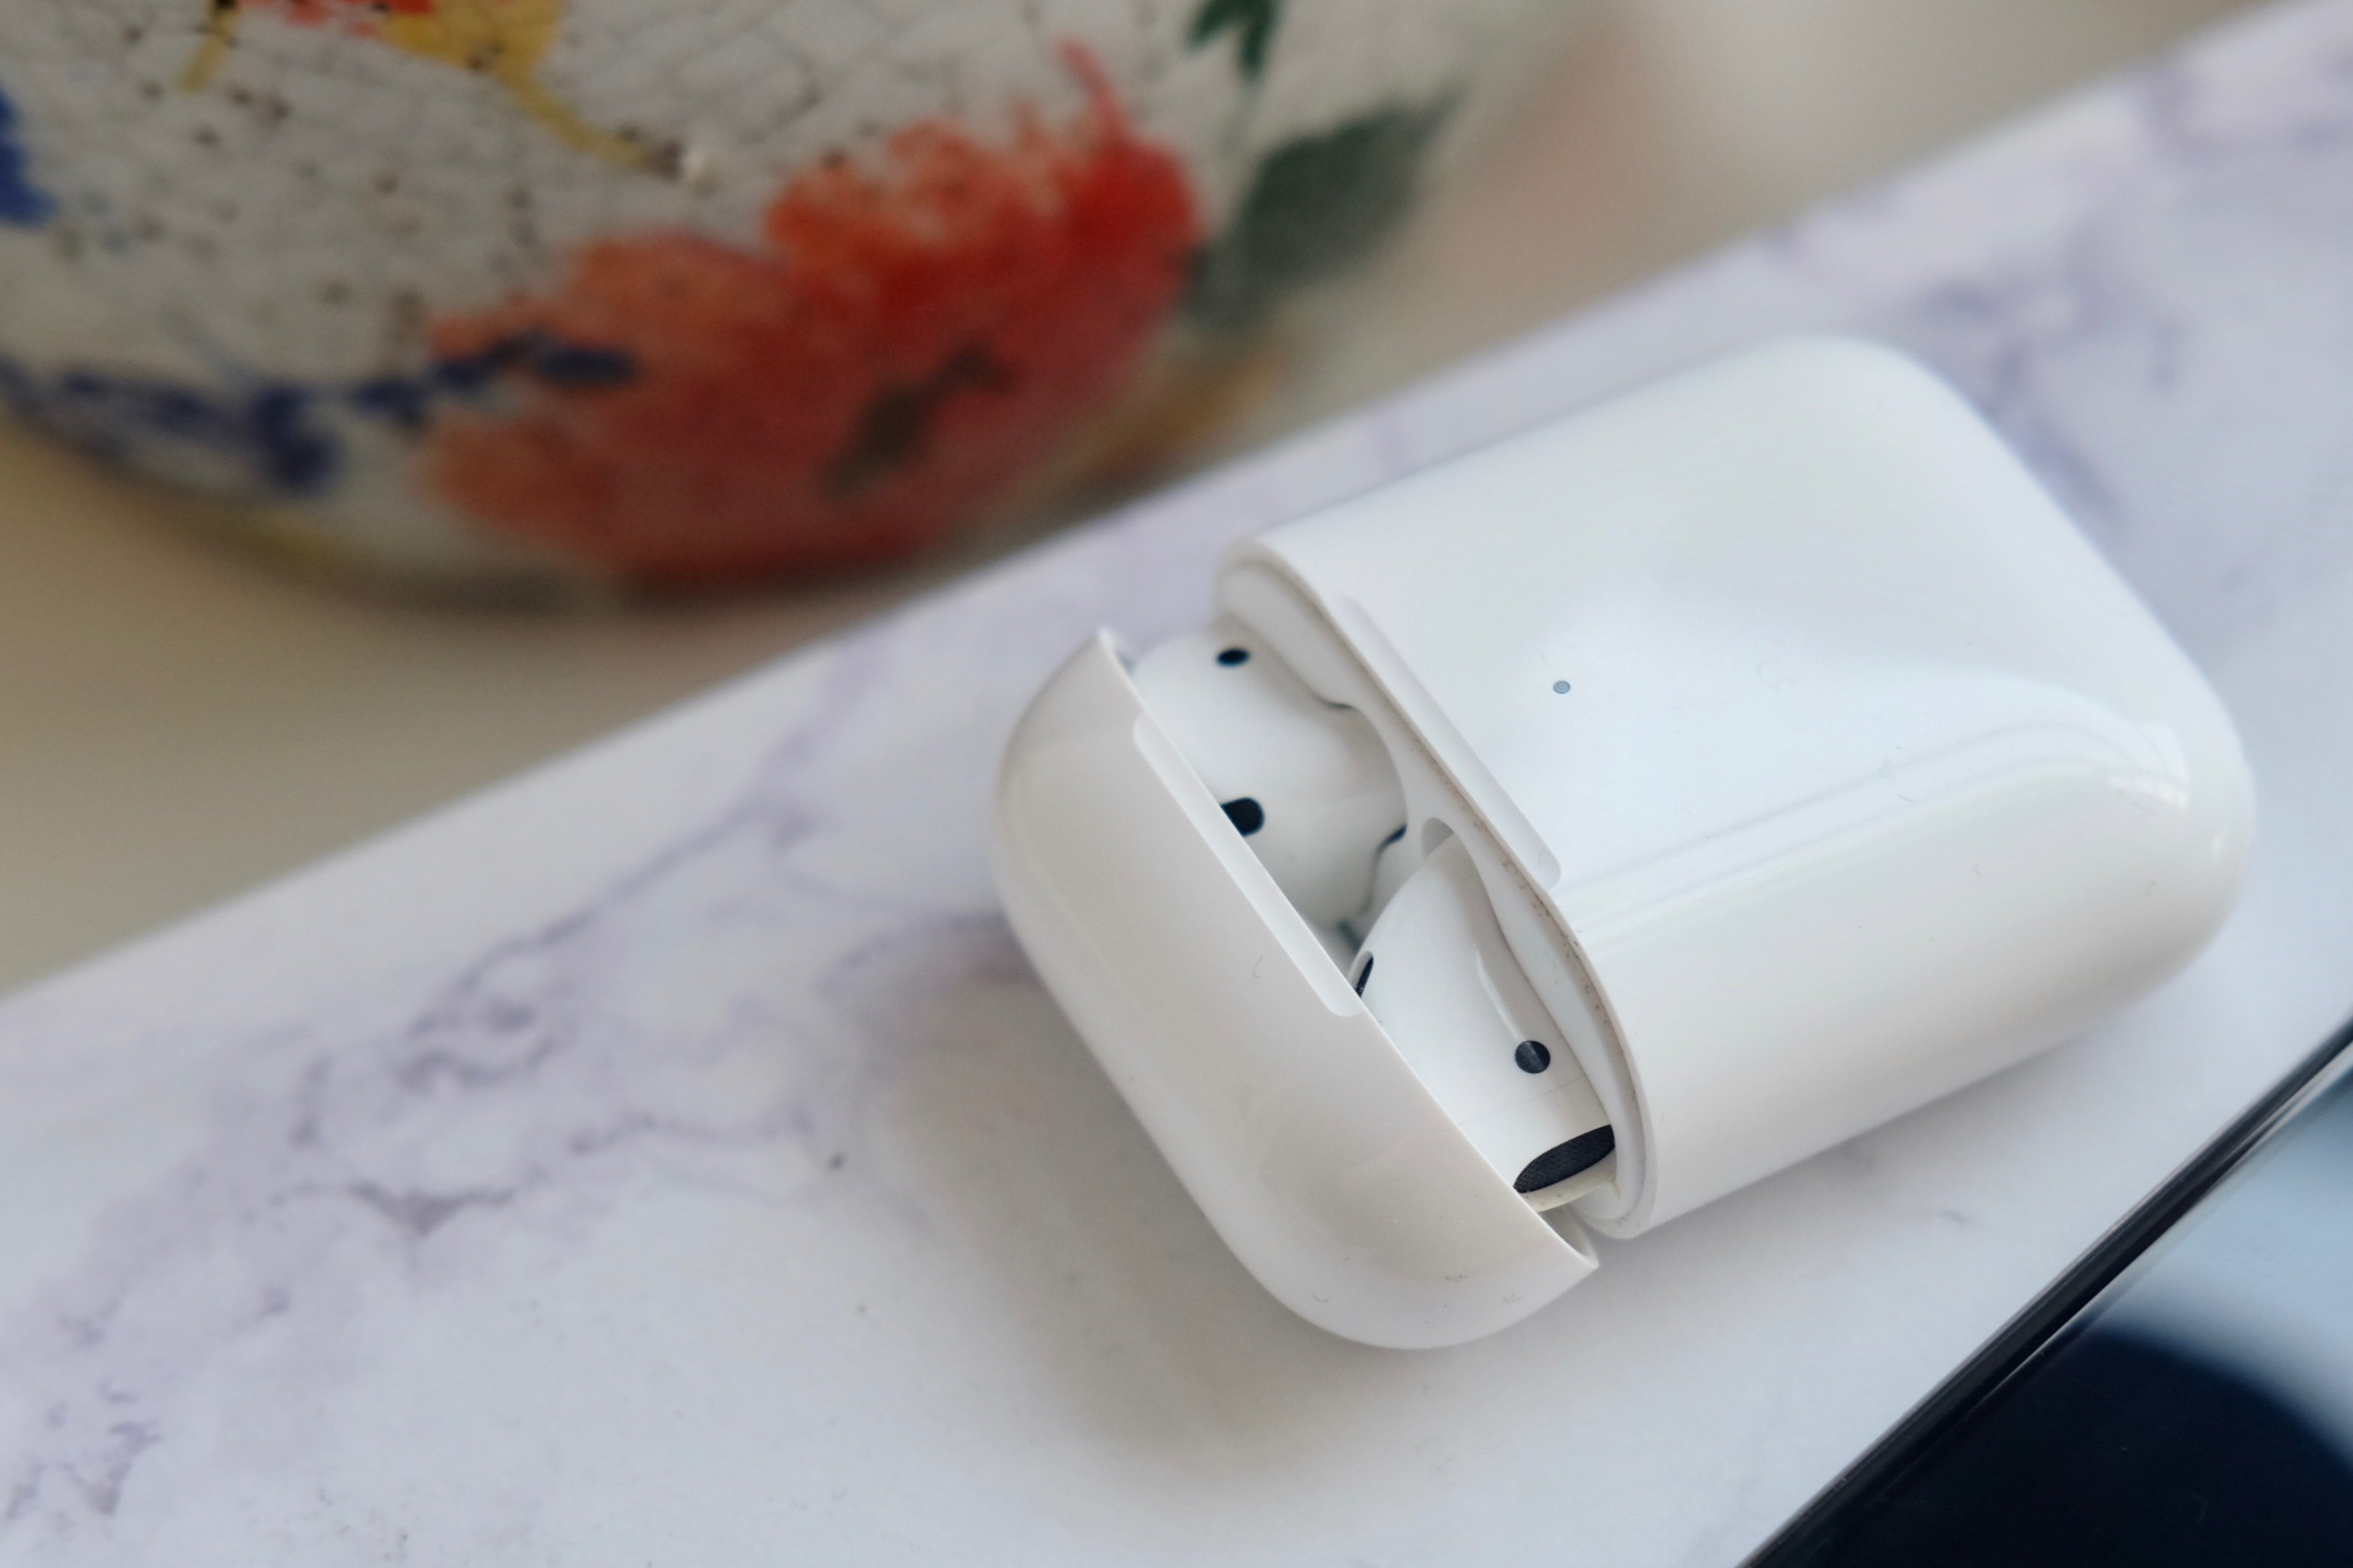 Bemyndige barndom Rustik Apple AirPods (2019) Review - Small upgrades | Trusted Reviews